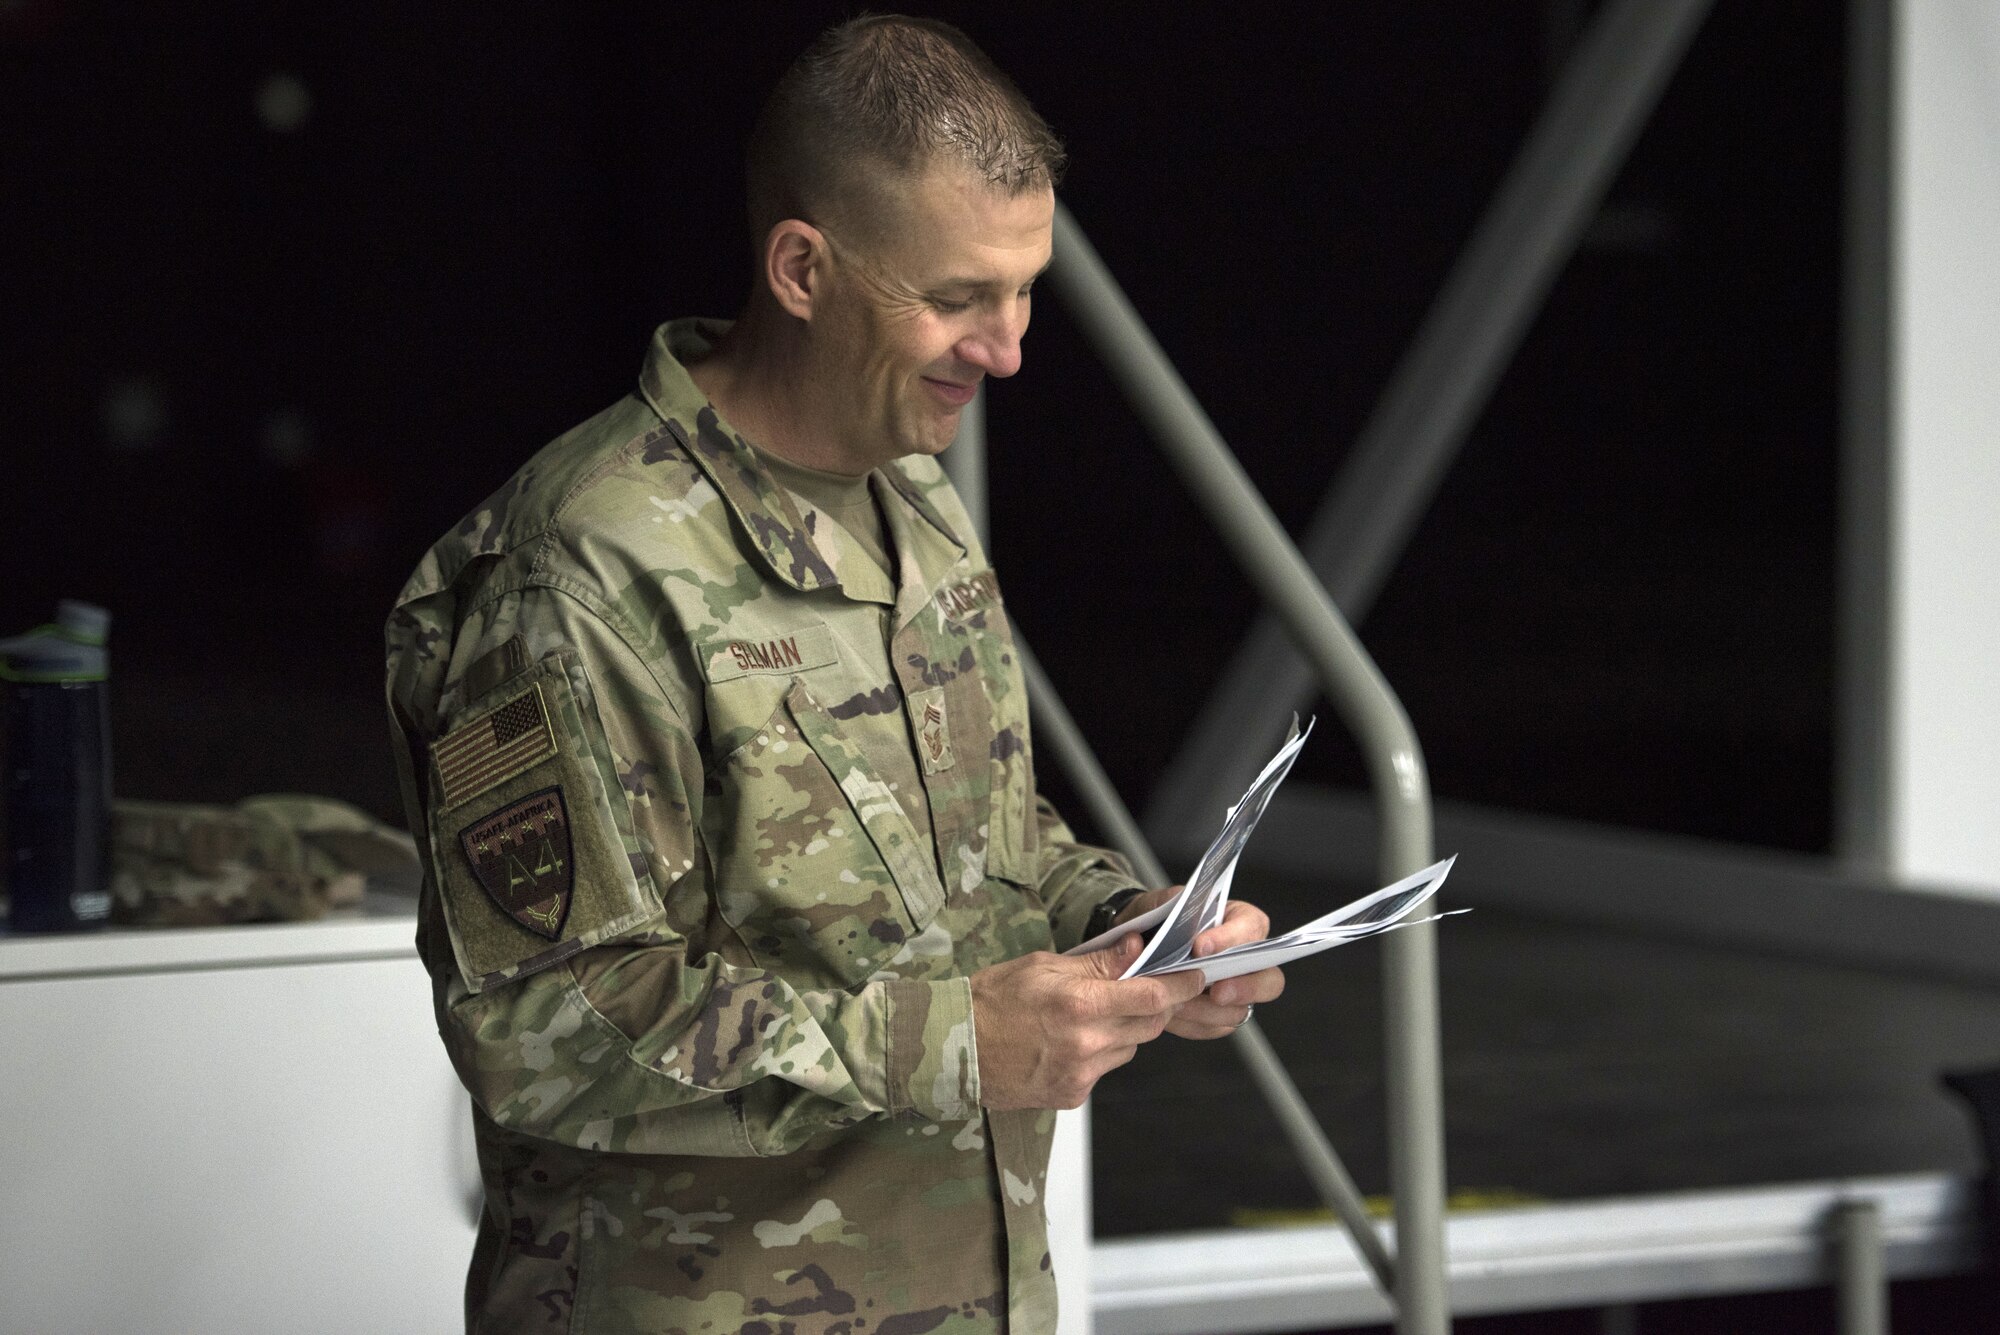 U.S. Air Force Chief Master Sgt. Jason Selman, United States Air Force in Europe-Air Forces Africa Chemical, Biological, Radiological, and Nuclear functional manager, teaches a CBRN defense course on Ramstein Air Base, Germany, Sept. 24, 2020.